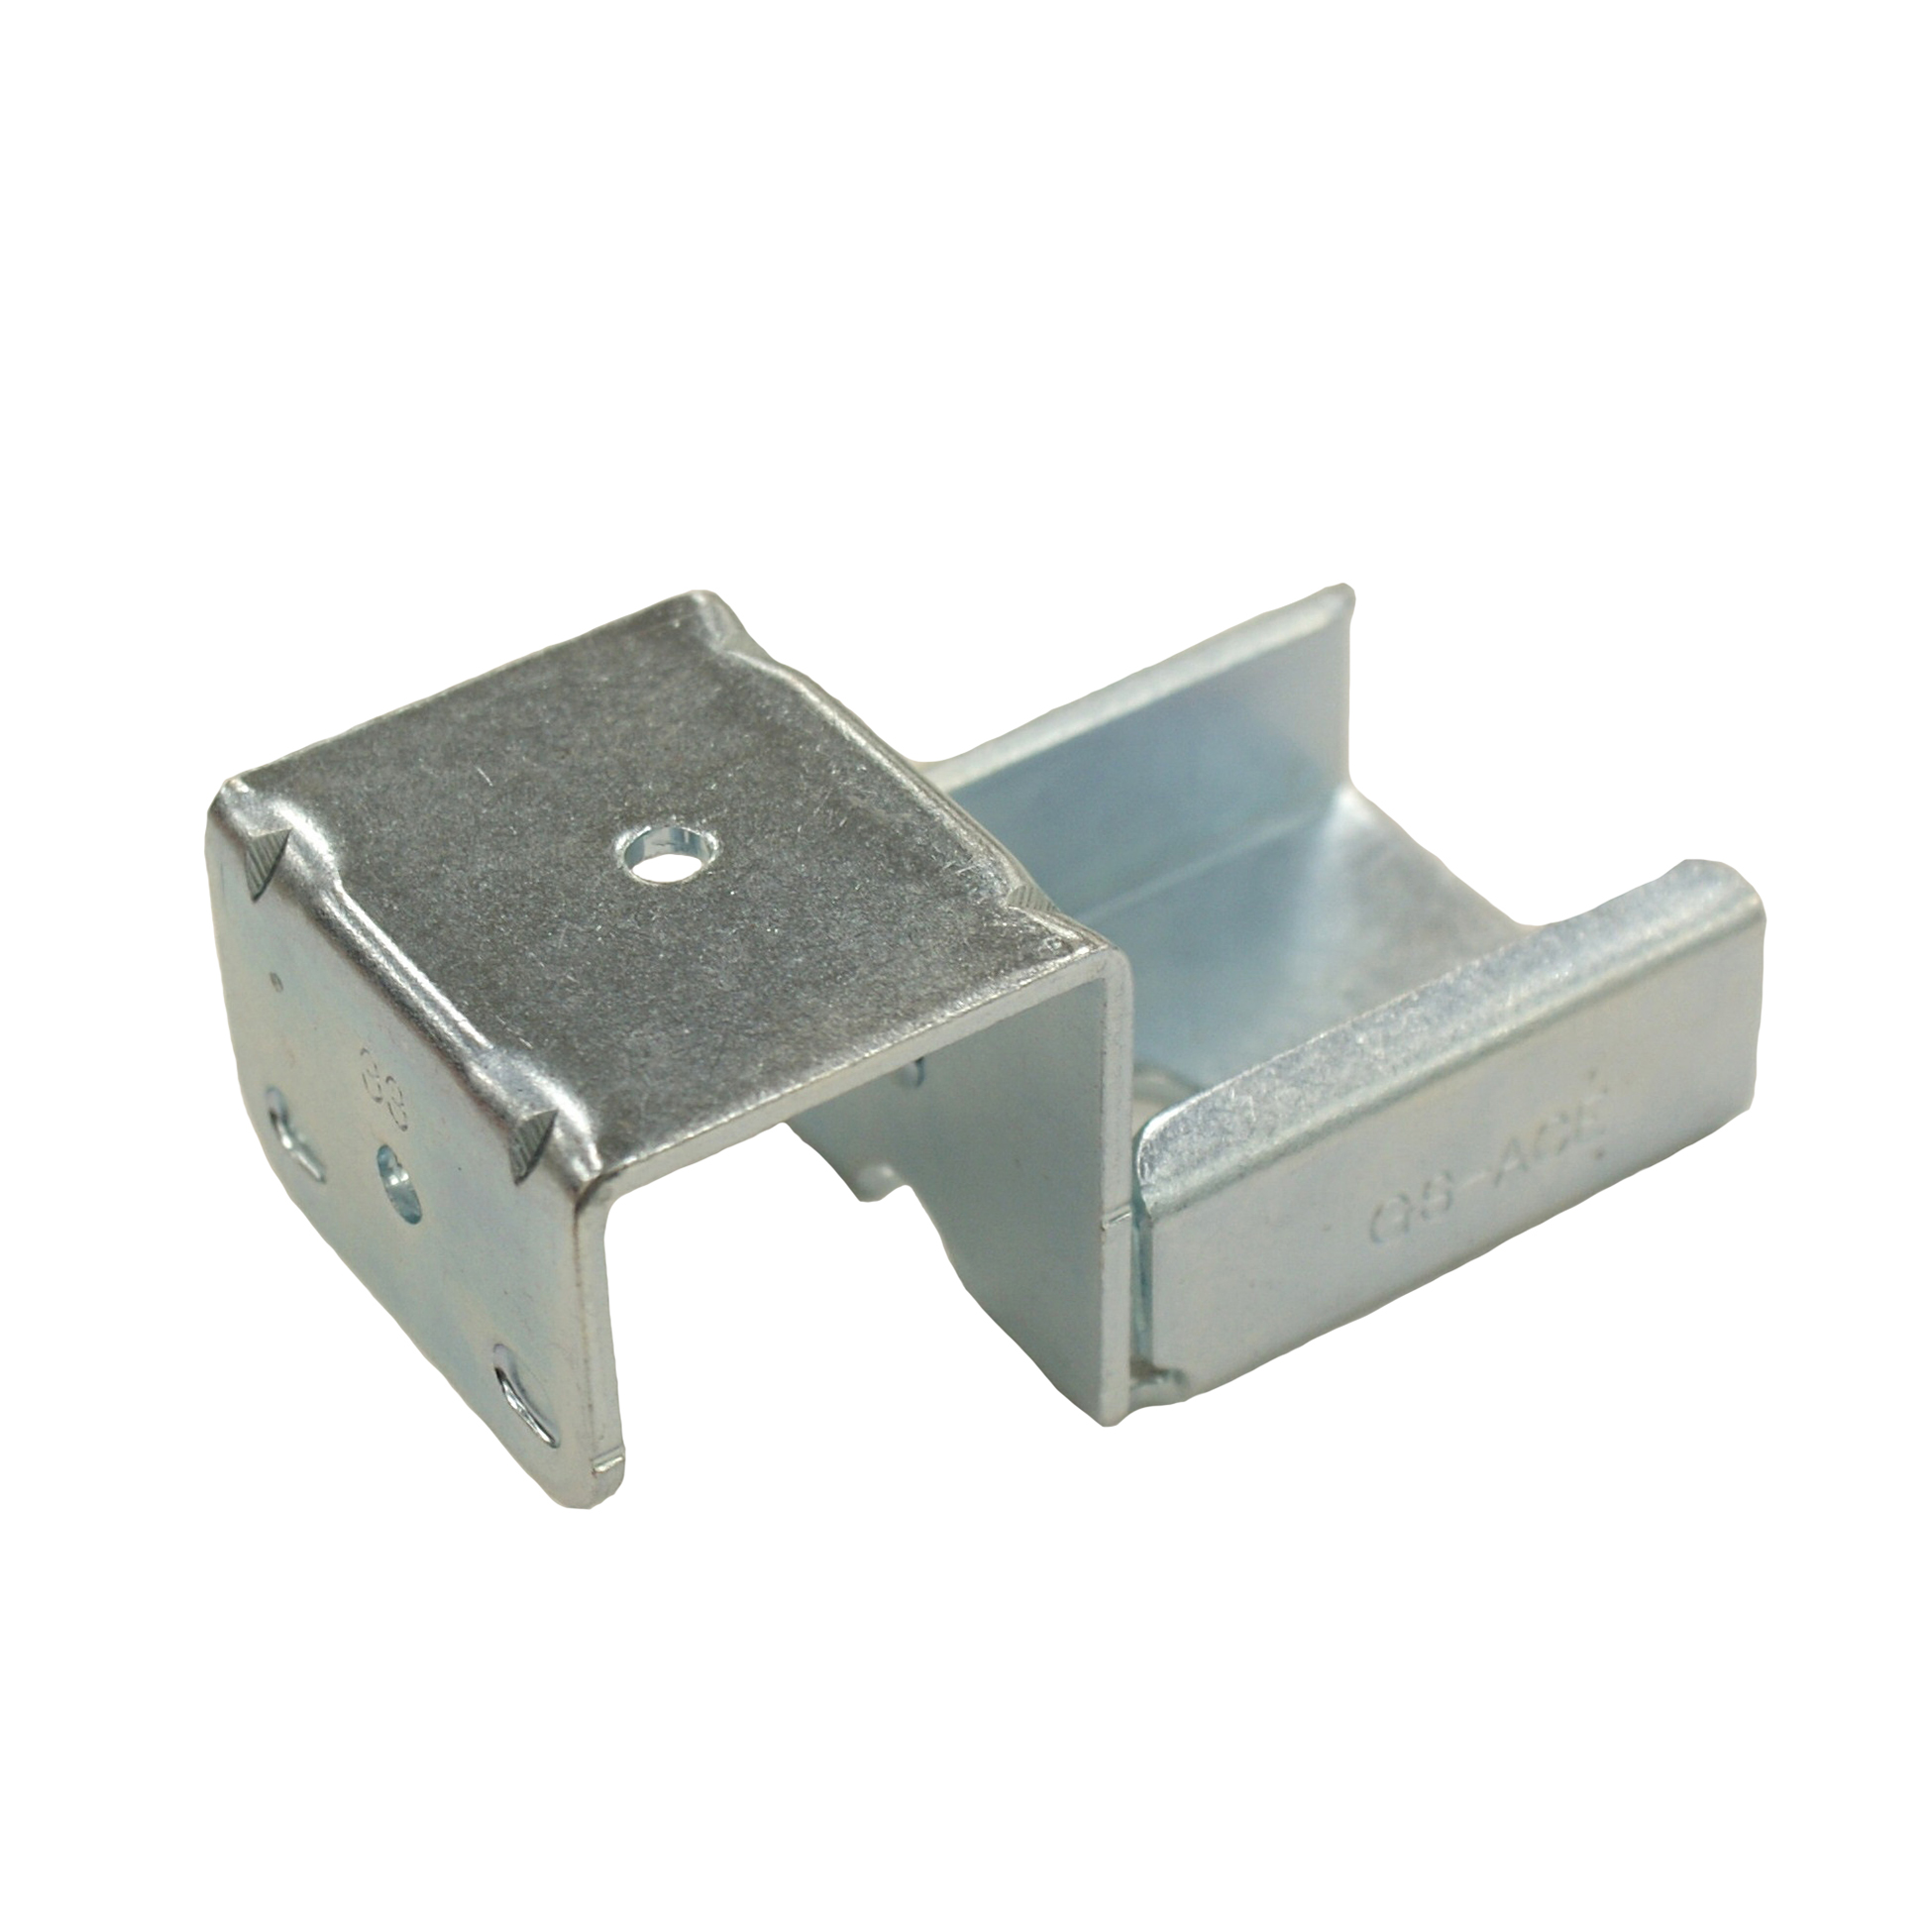 Placon Support, 40 Series, GP-A-33